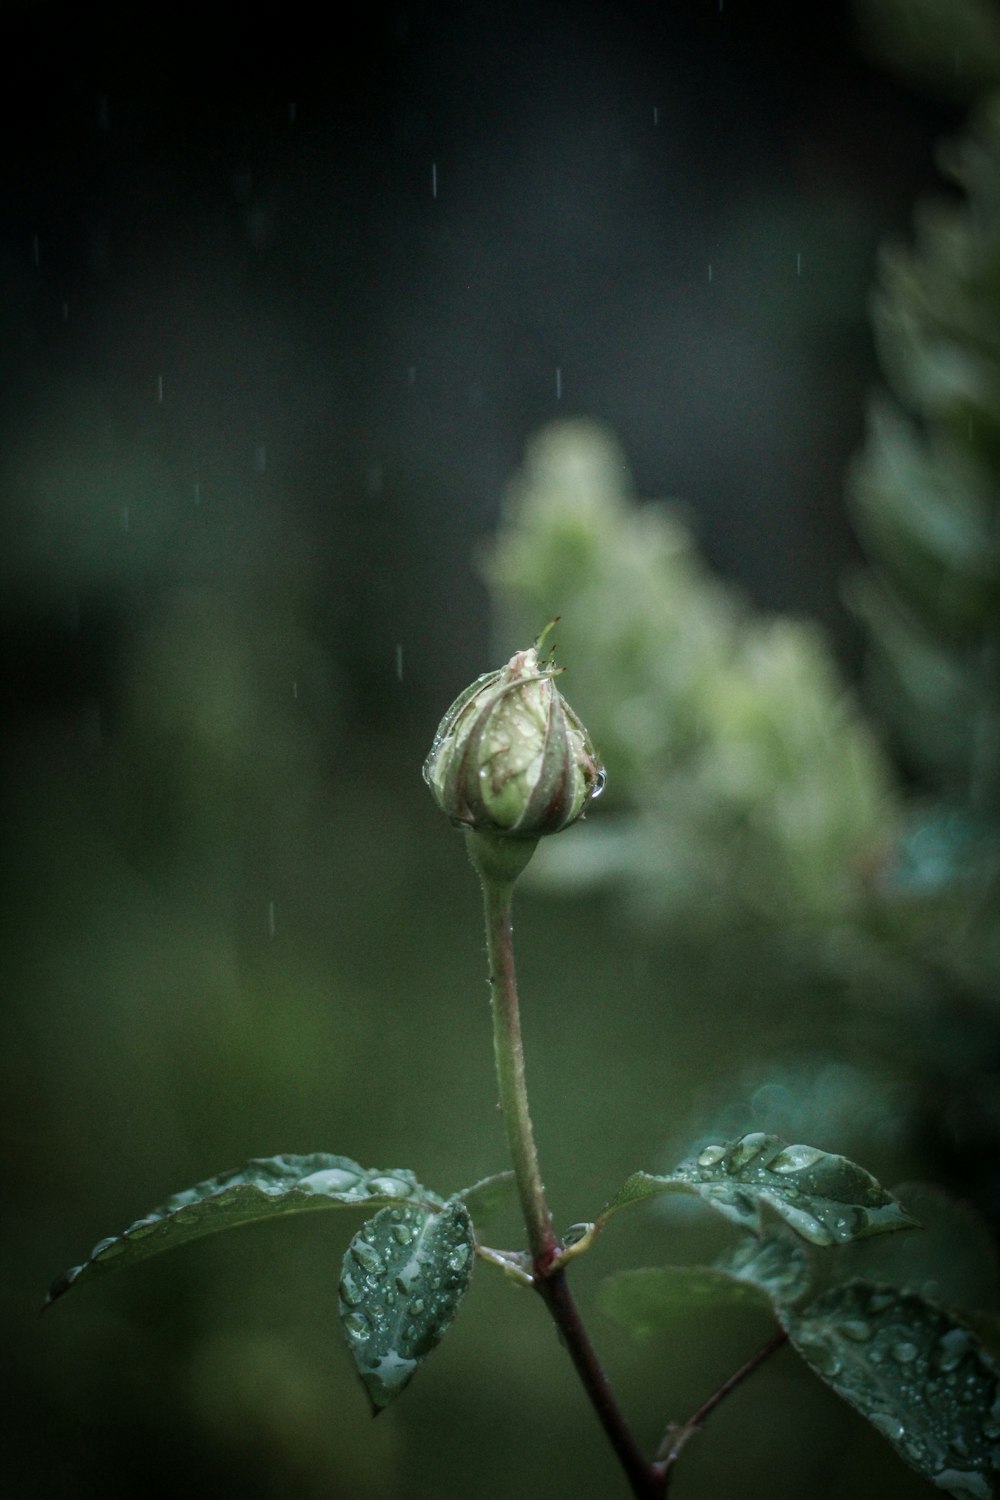 a single flower bud with water droplets on it